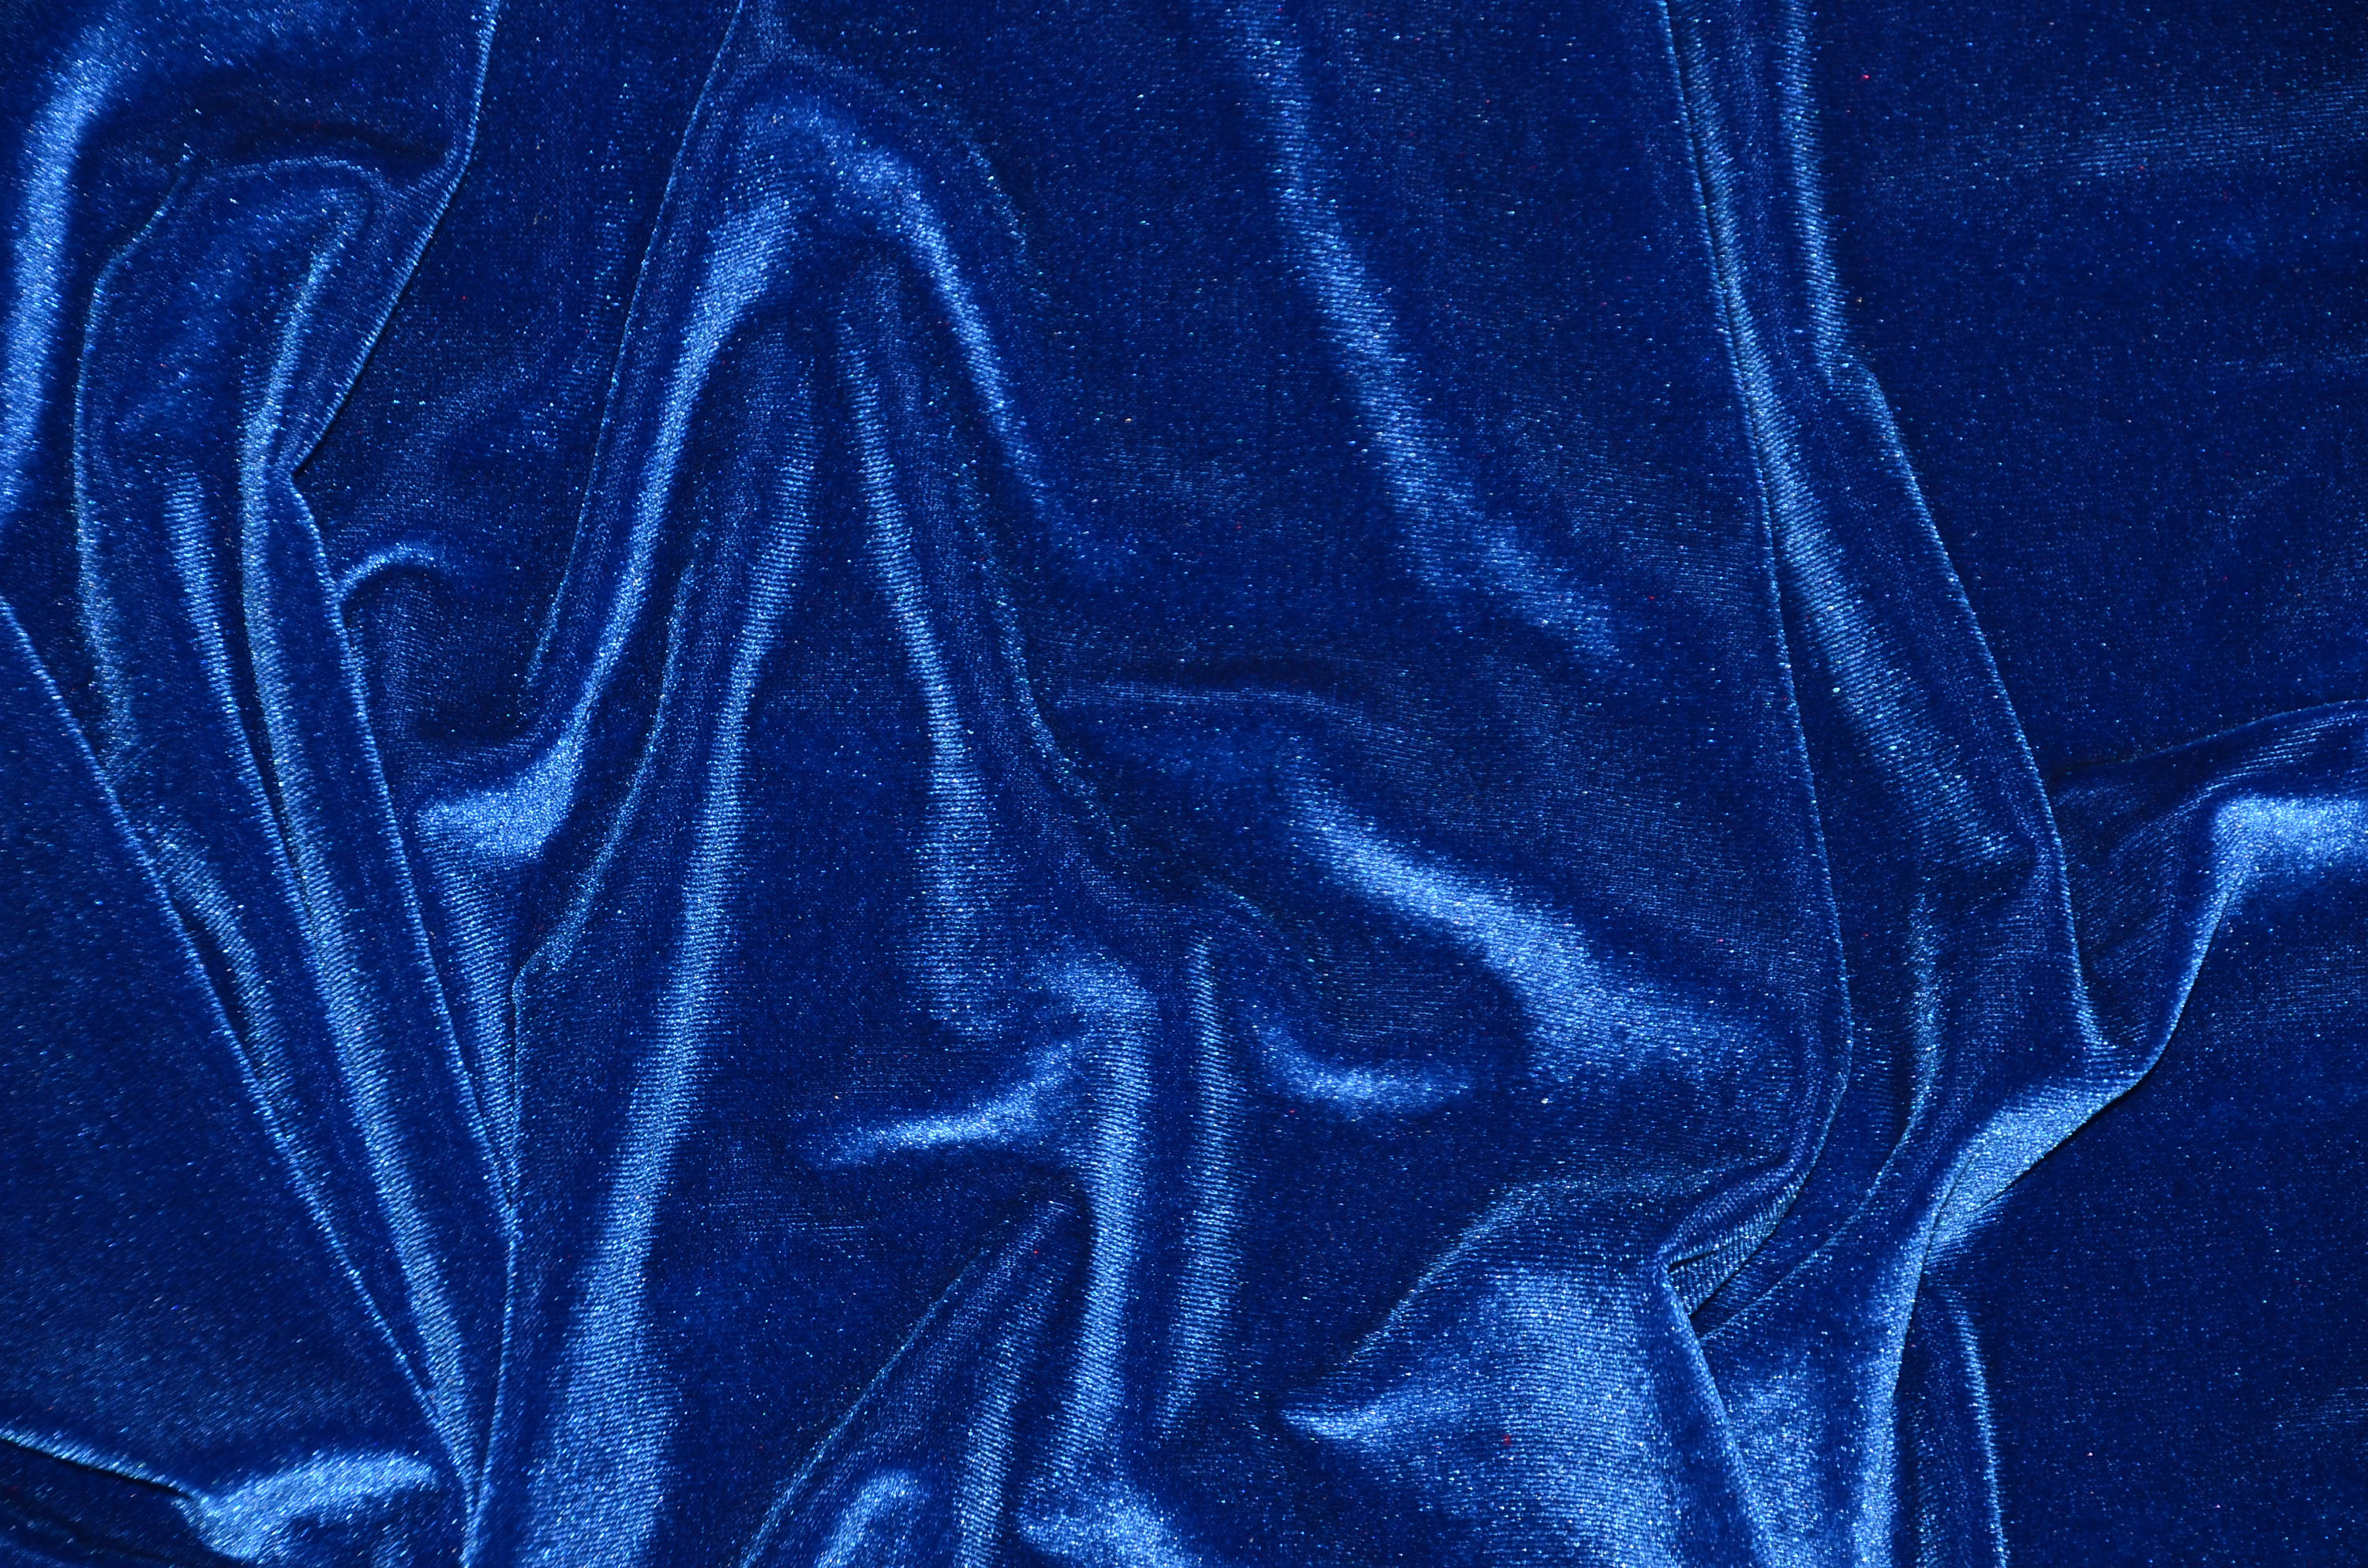 Royal 4-WAY Spandex Stretch Velvet 60" Wide || Dance Wear Fabric by the Yard